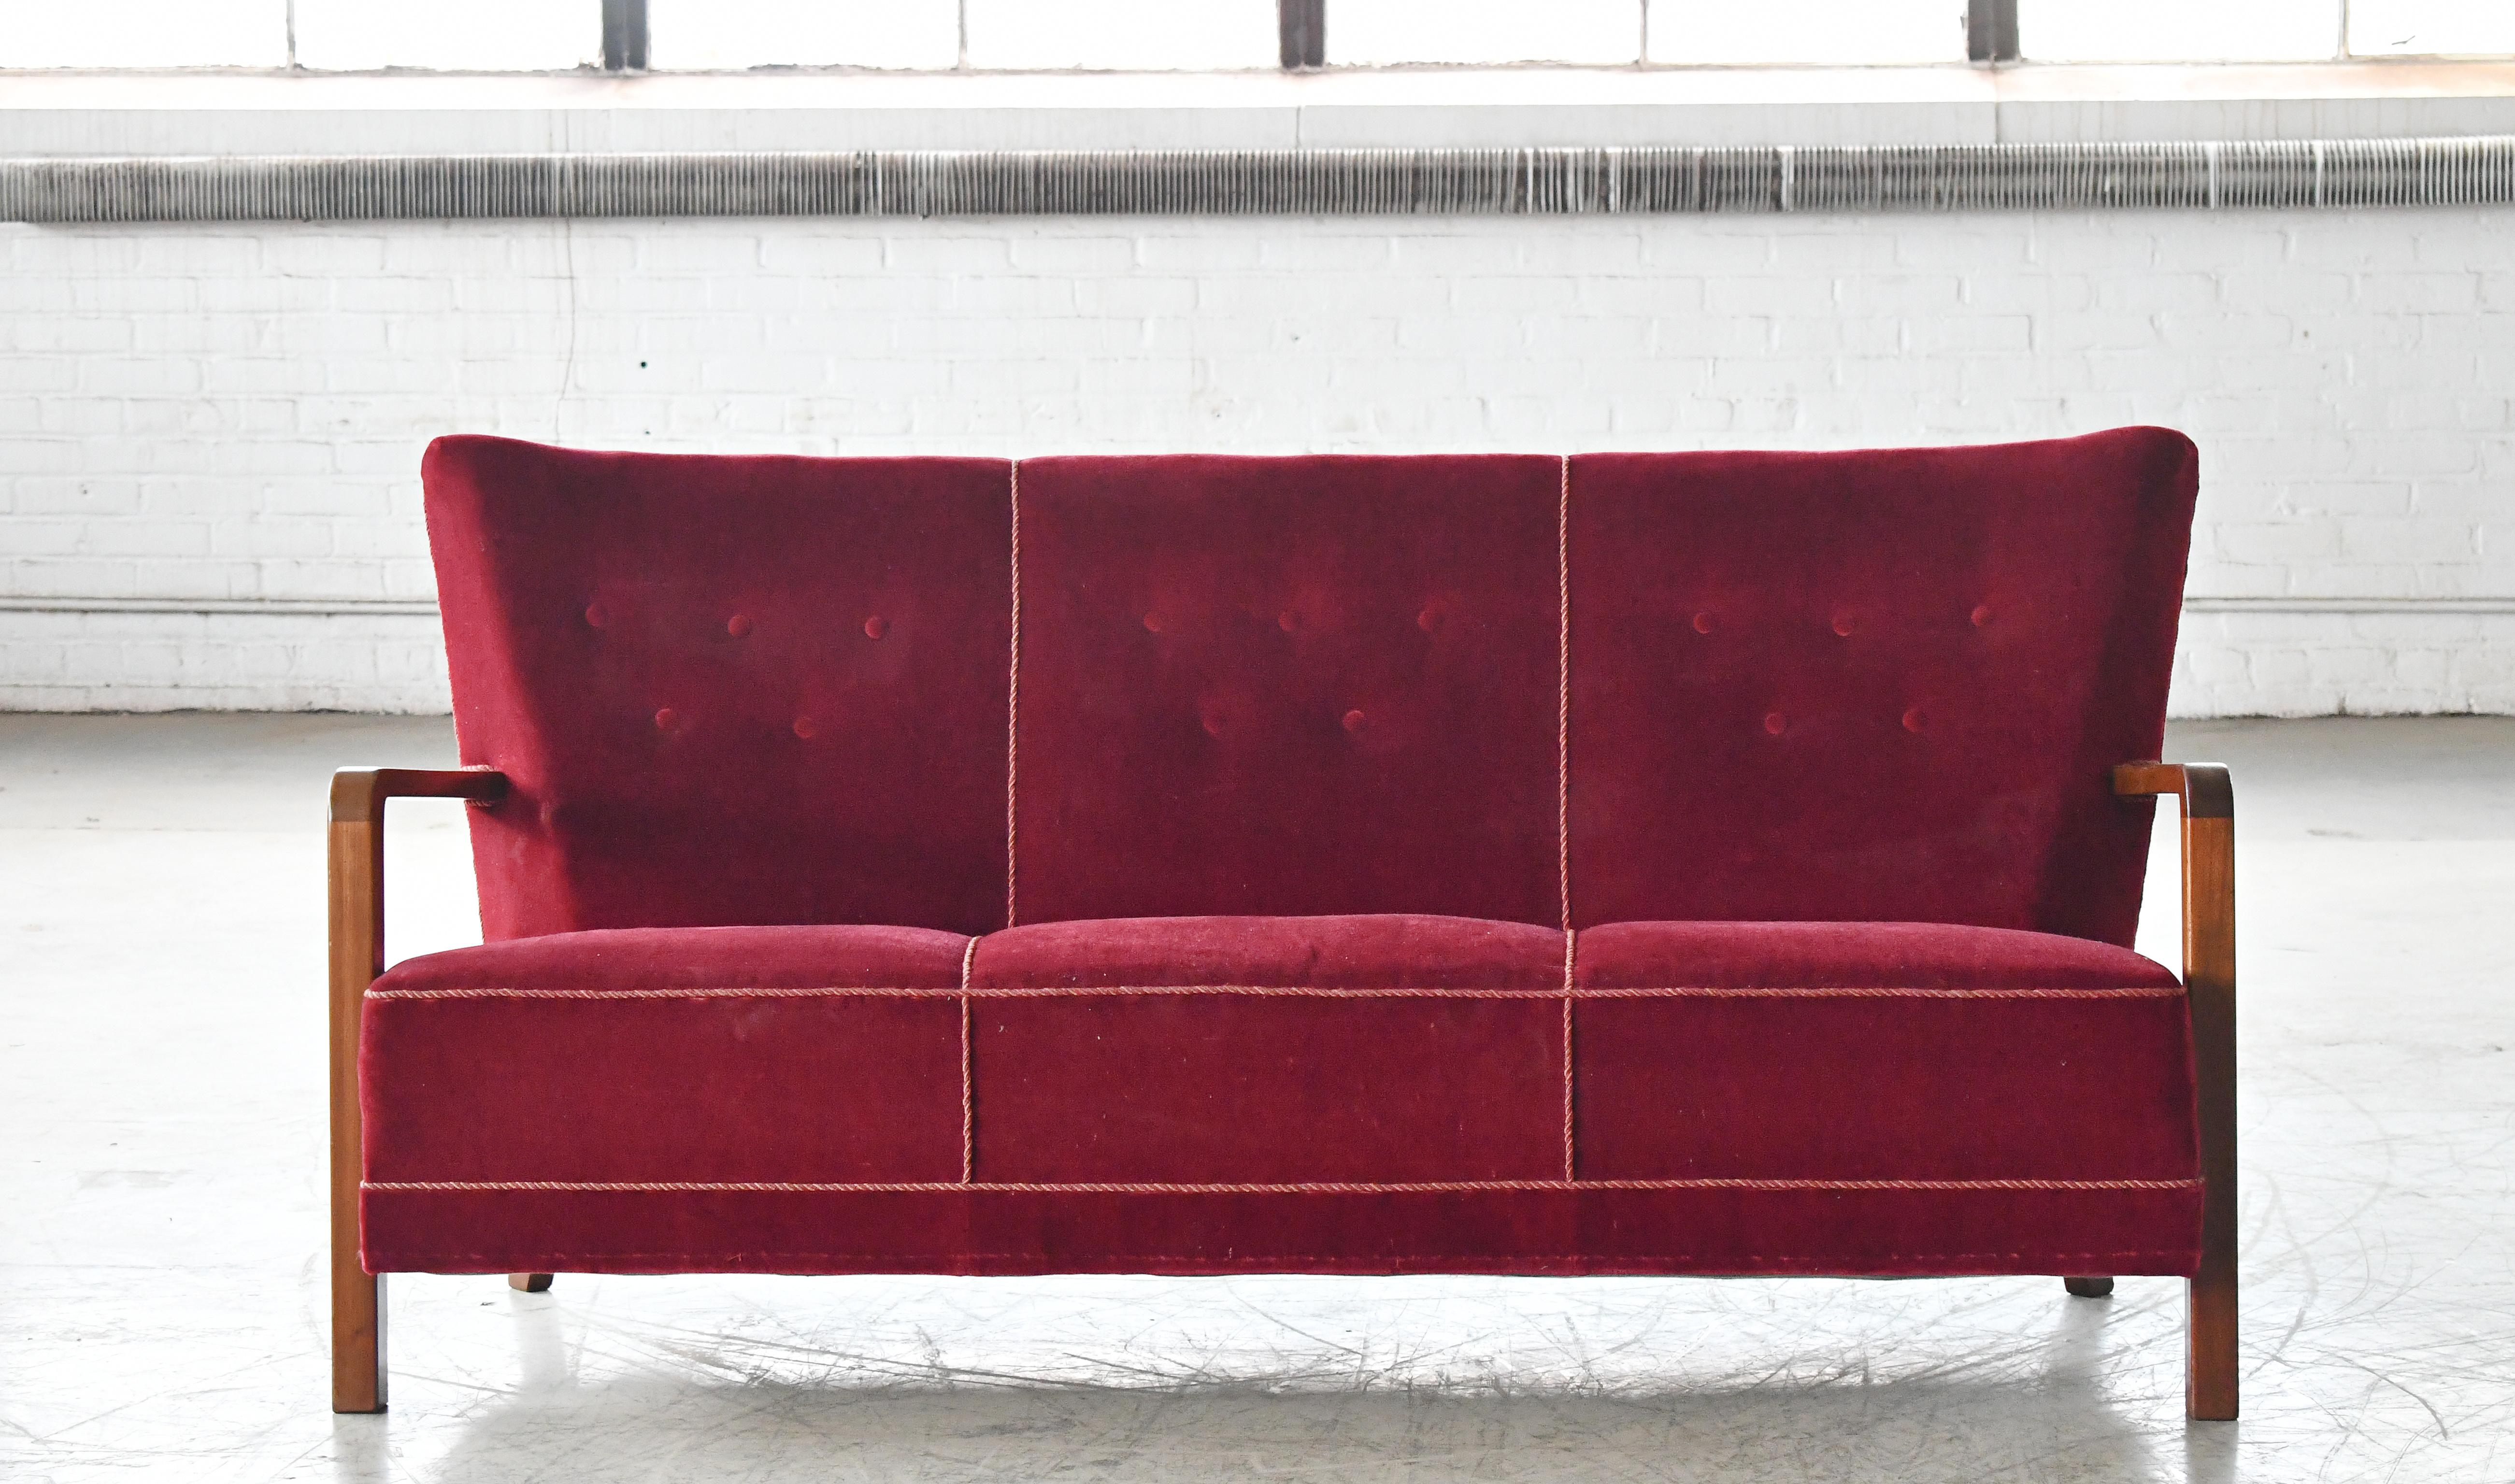 Danish Art Deco or Early Midcentury Sofa with Open Wooden Armrests, 1930's In Good Condition For Sale In Bridgeport, CT